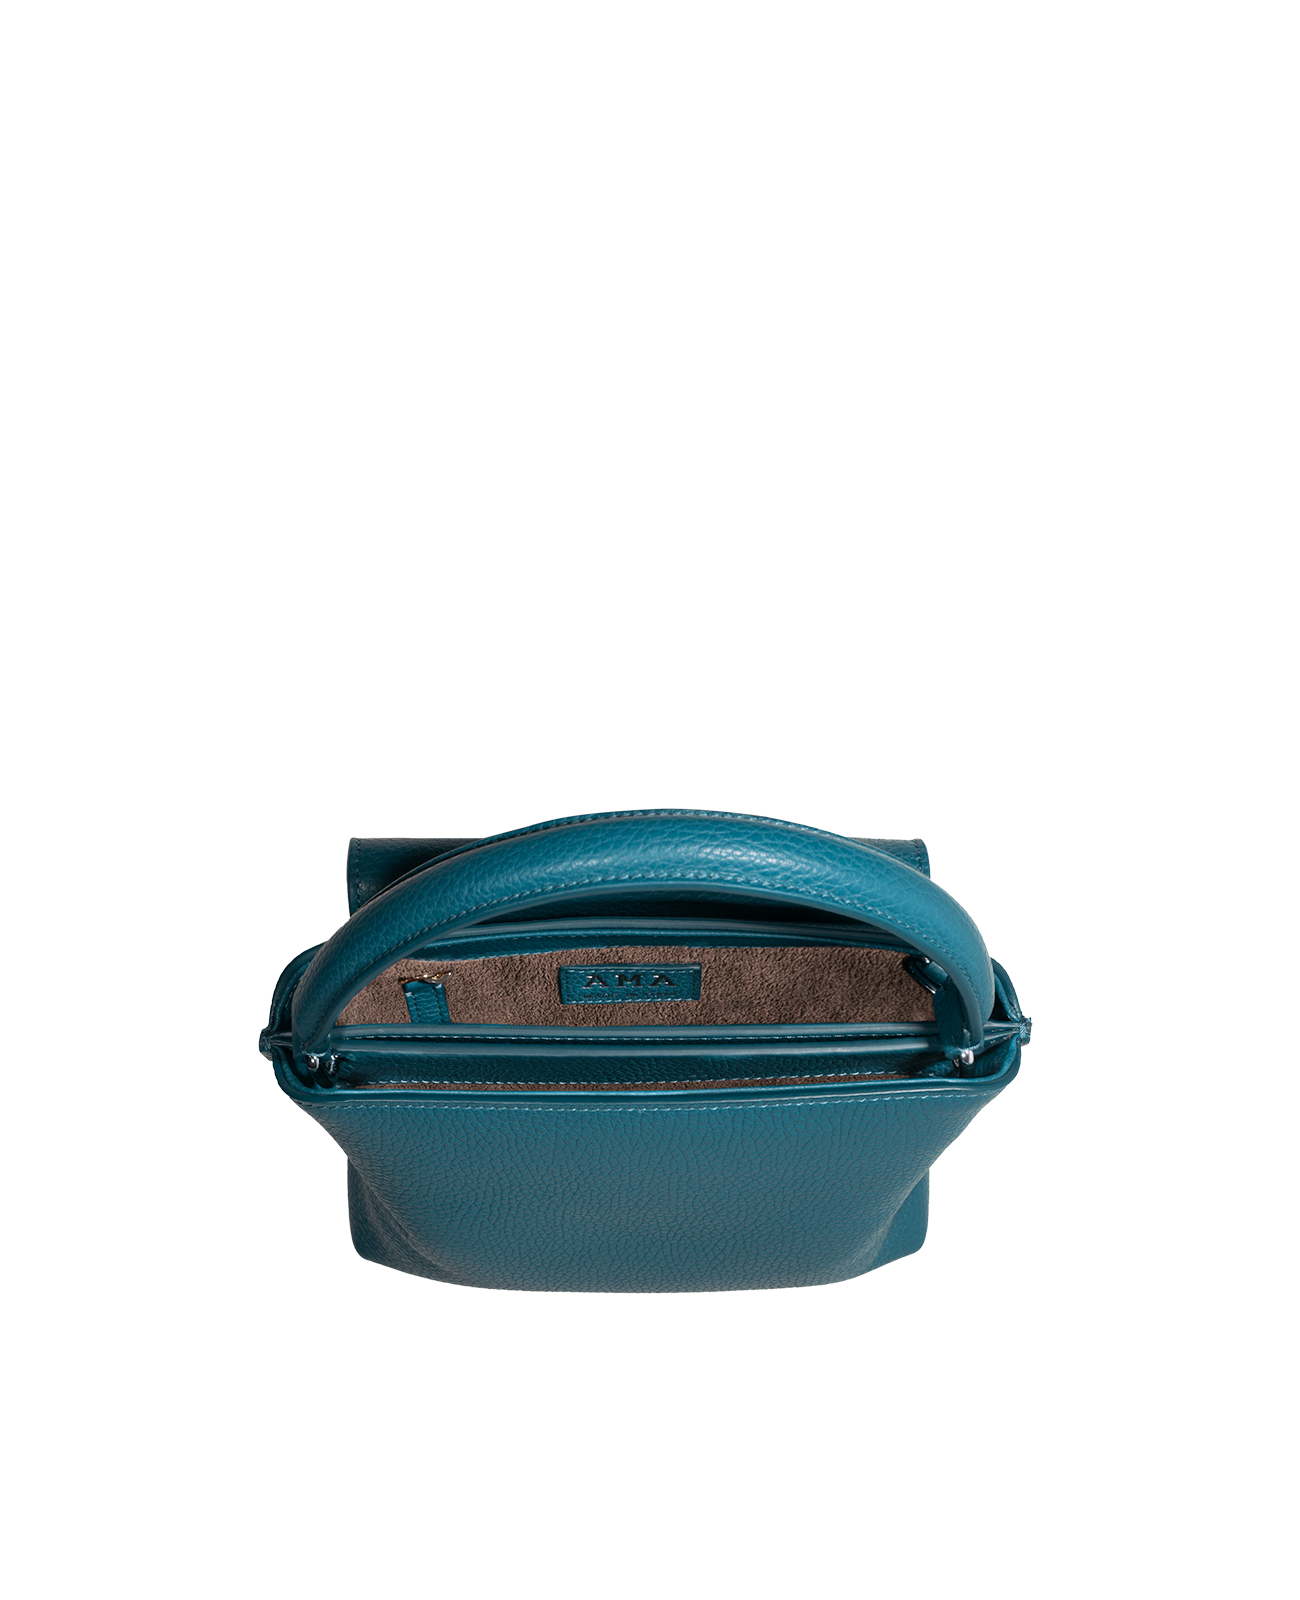 Cross-body bag in Italian full-grain leather, semi-aniline calf Italian leather with detachable shoulder strap.Three compartments, zip pocket in the back compartment. Magnetic flap closure with logo. Color: Teal. Size:Medium